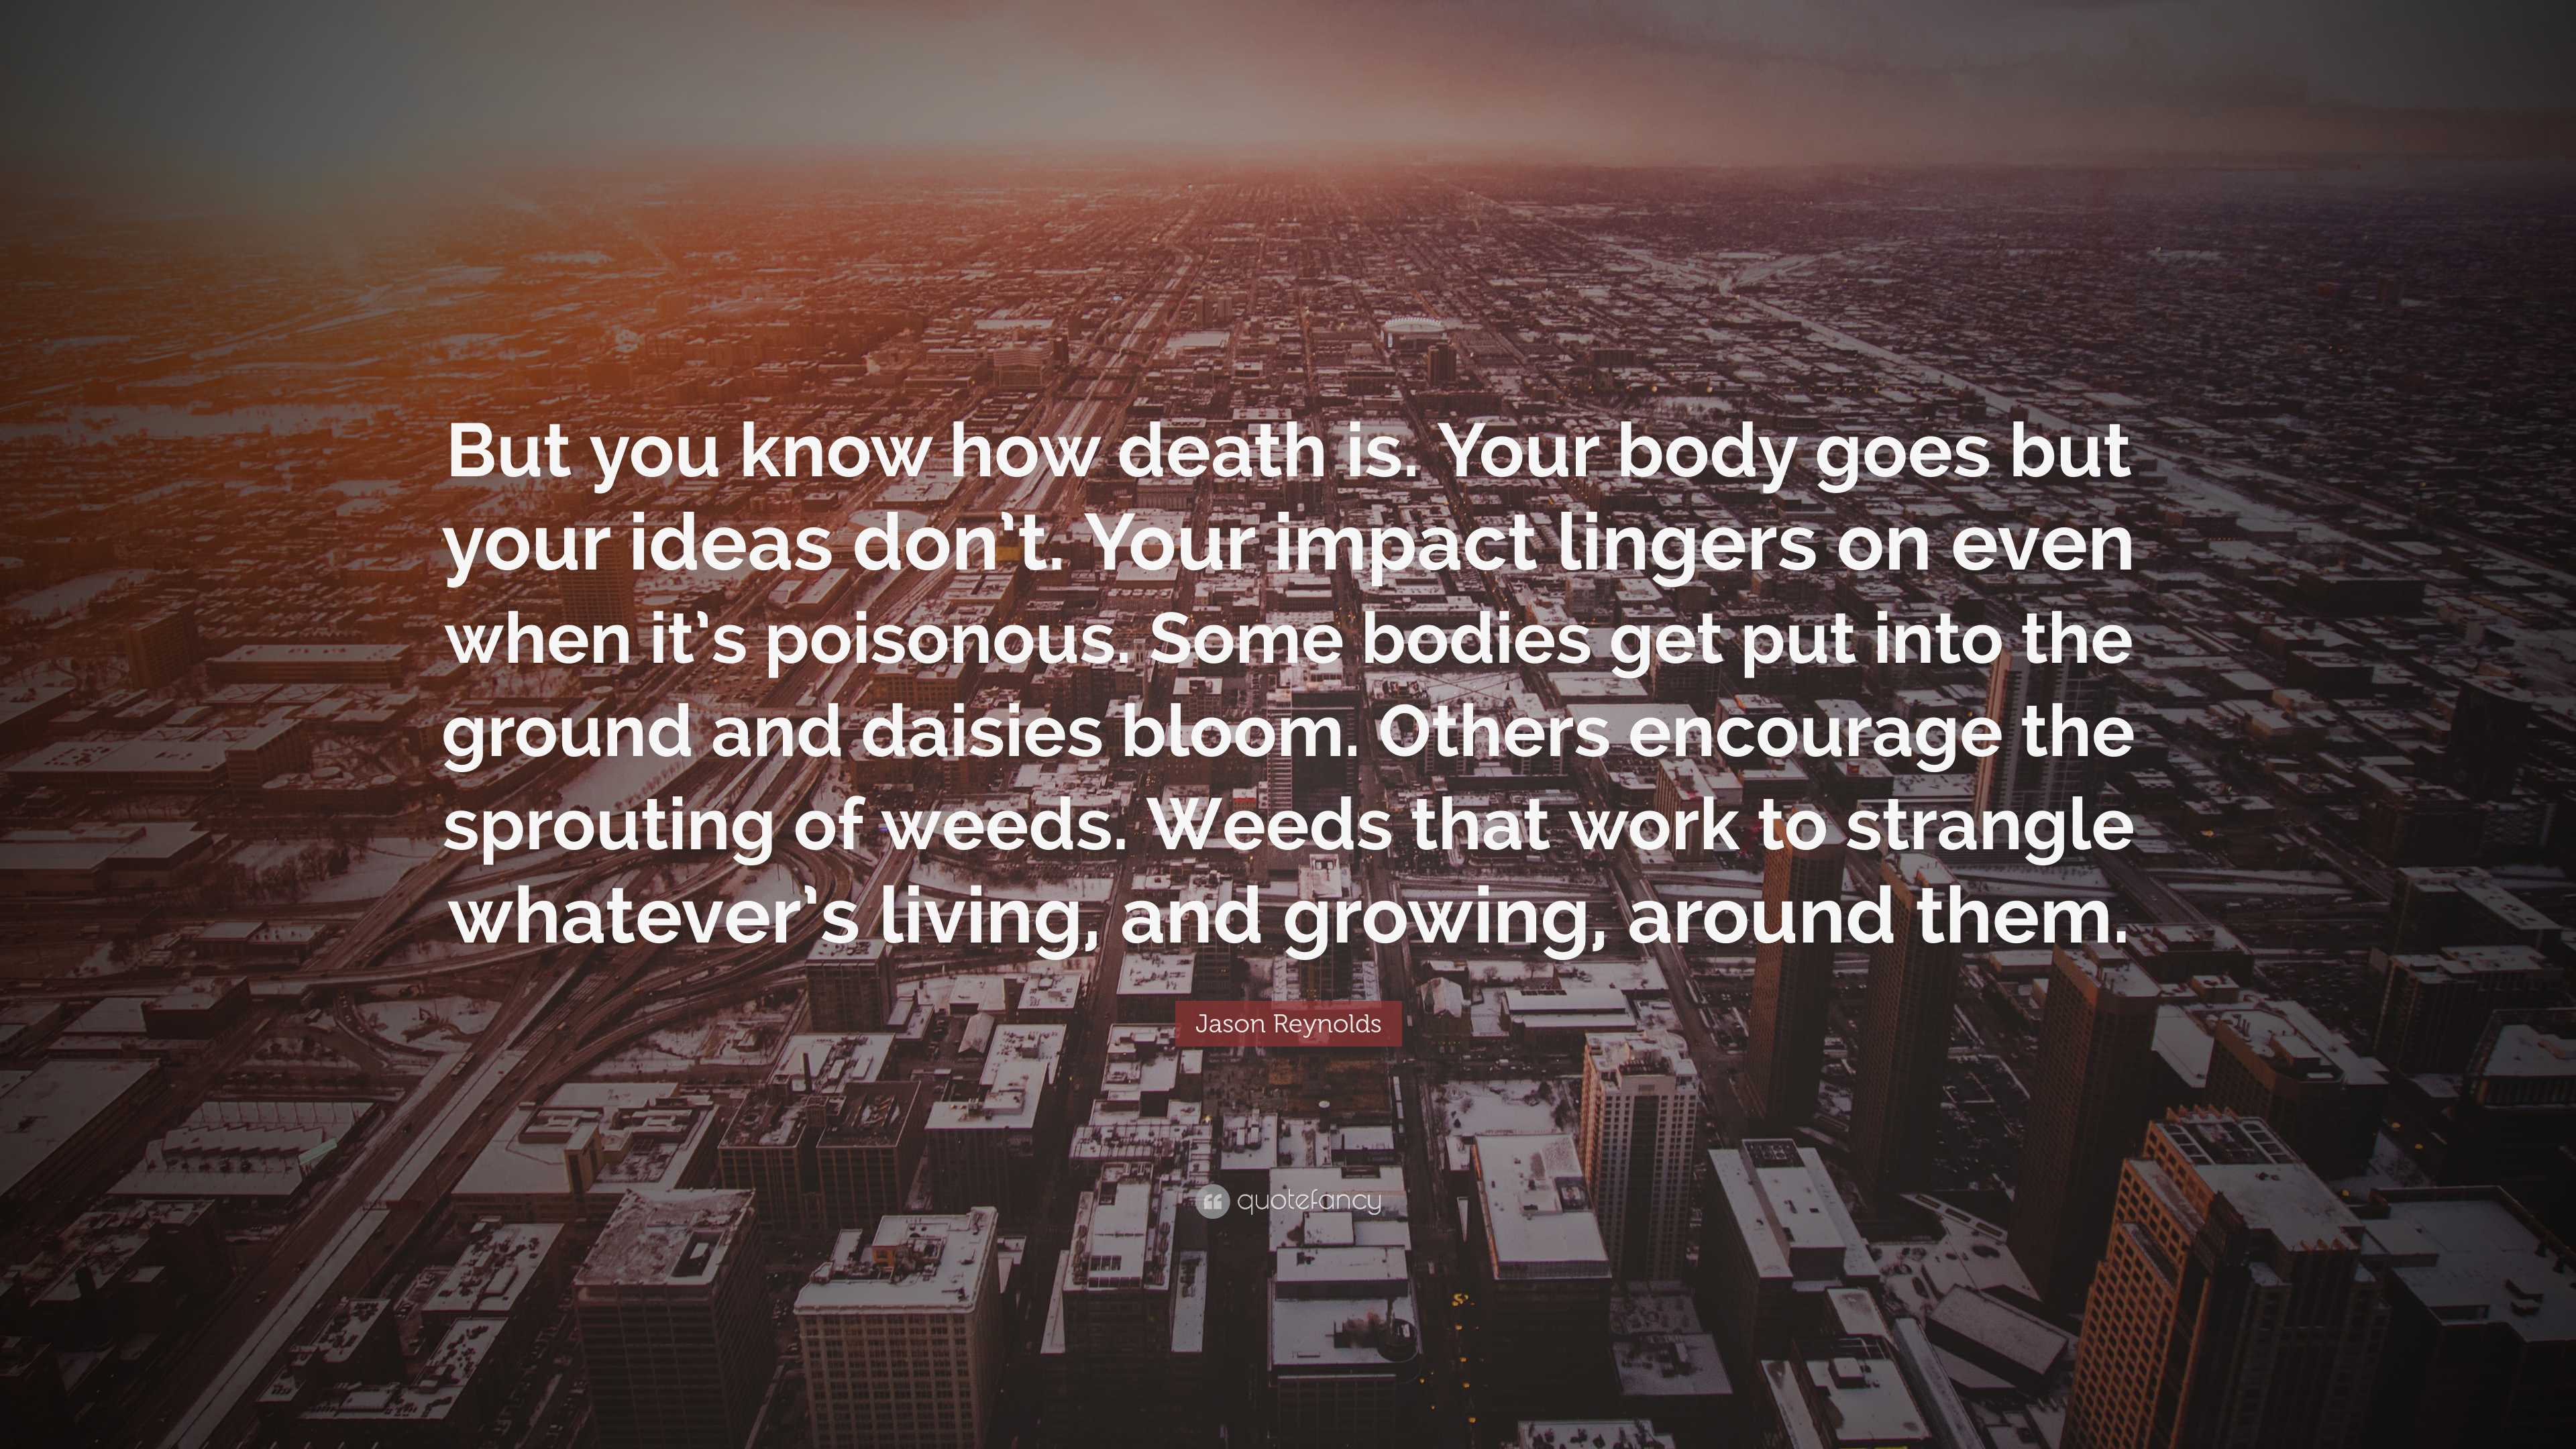 https://quotefancy.com/media/wallpaper/3840x2160/8012280-Jason-Reynolds-Quote-But-you-know-how-death-is-Your-body-goes-but.jpg